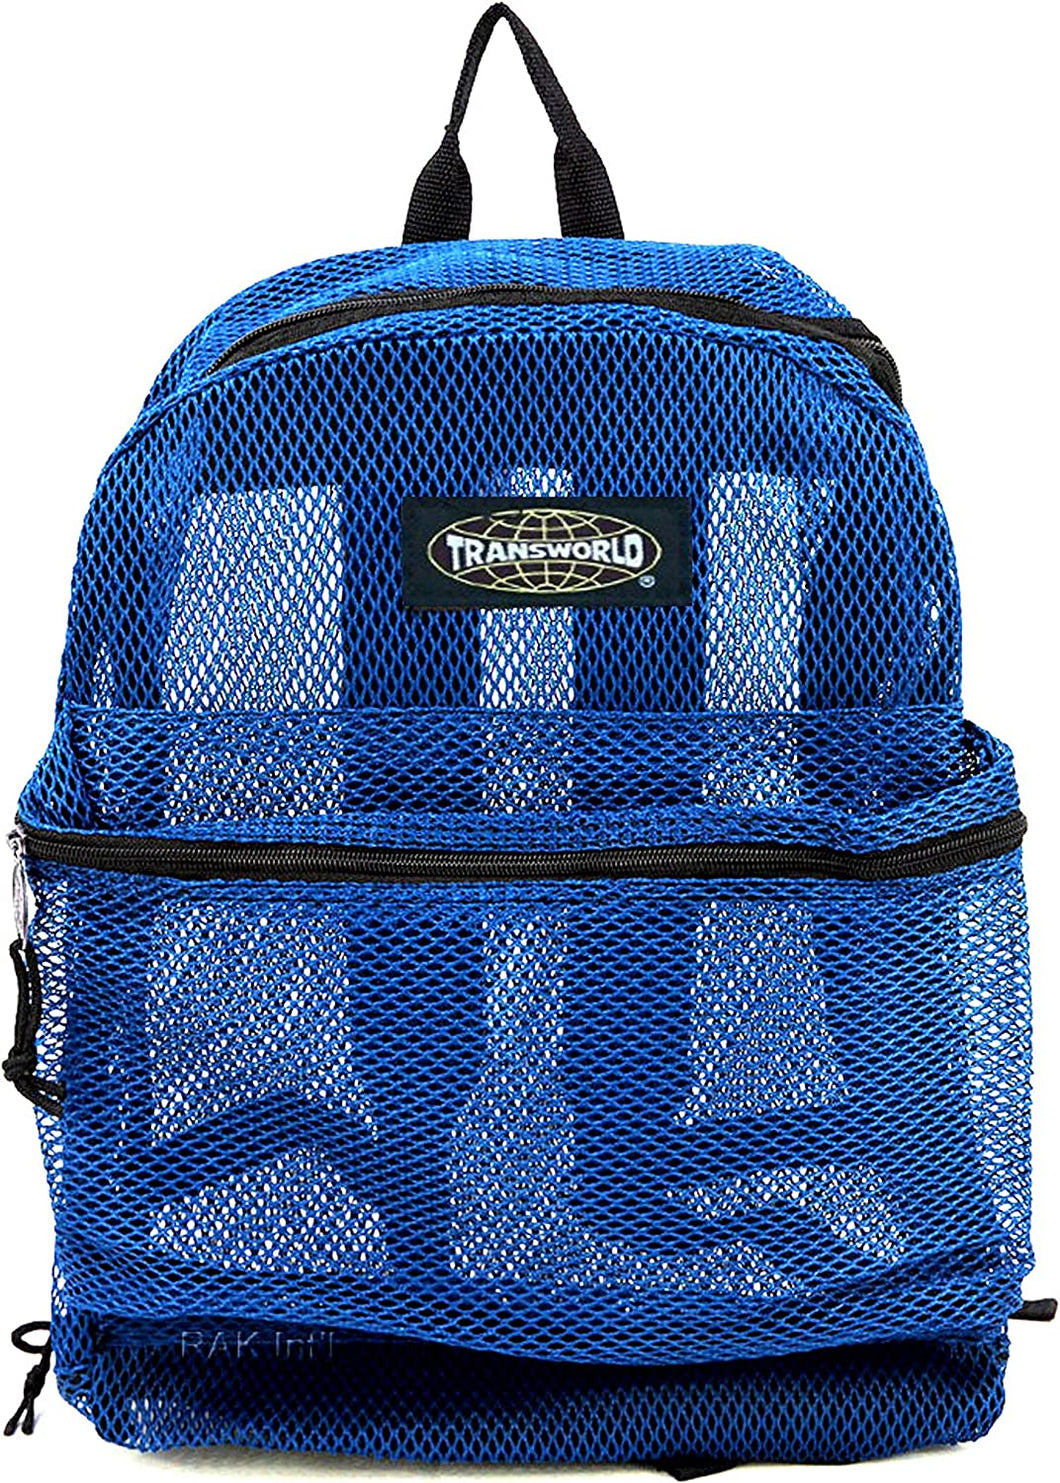 TransWorld Backpack Small 12 inch Mesh Blue